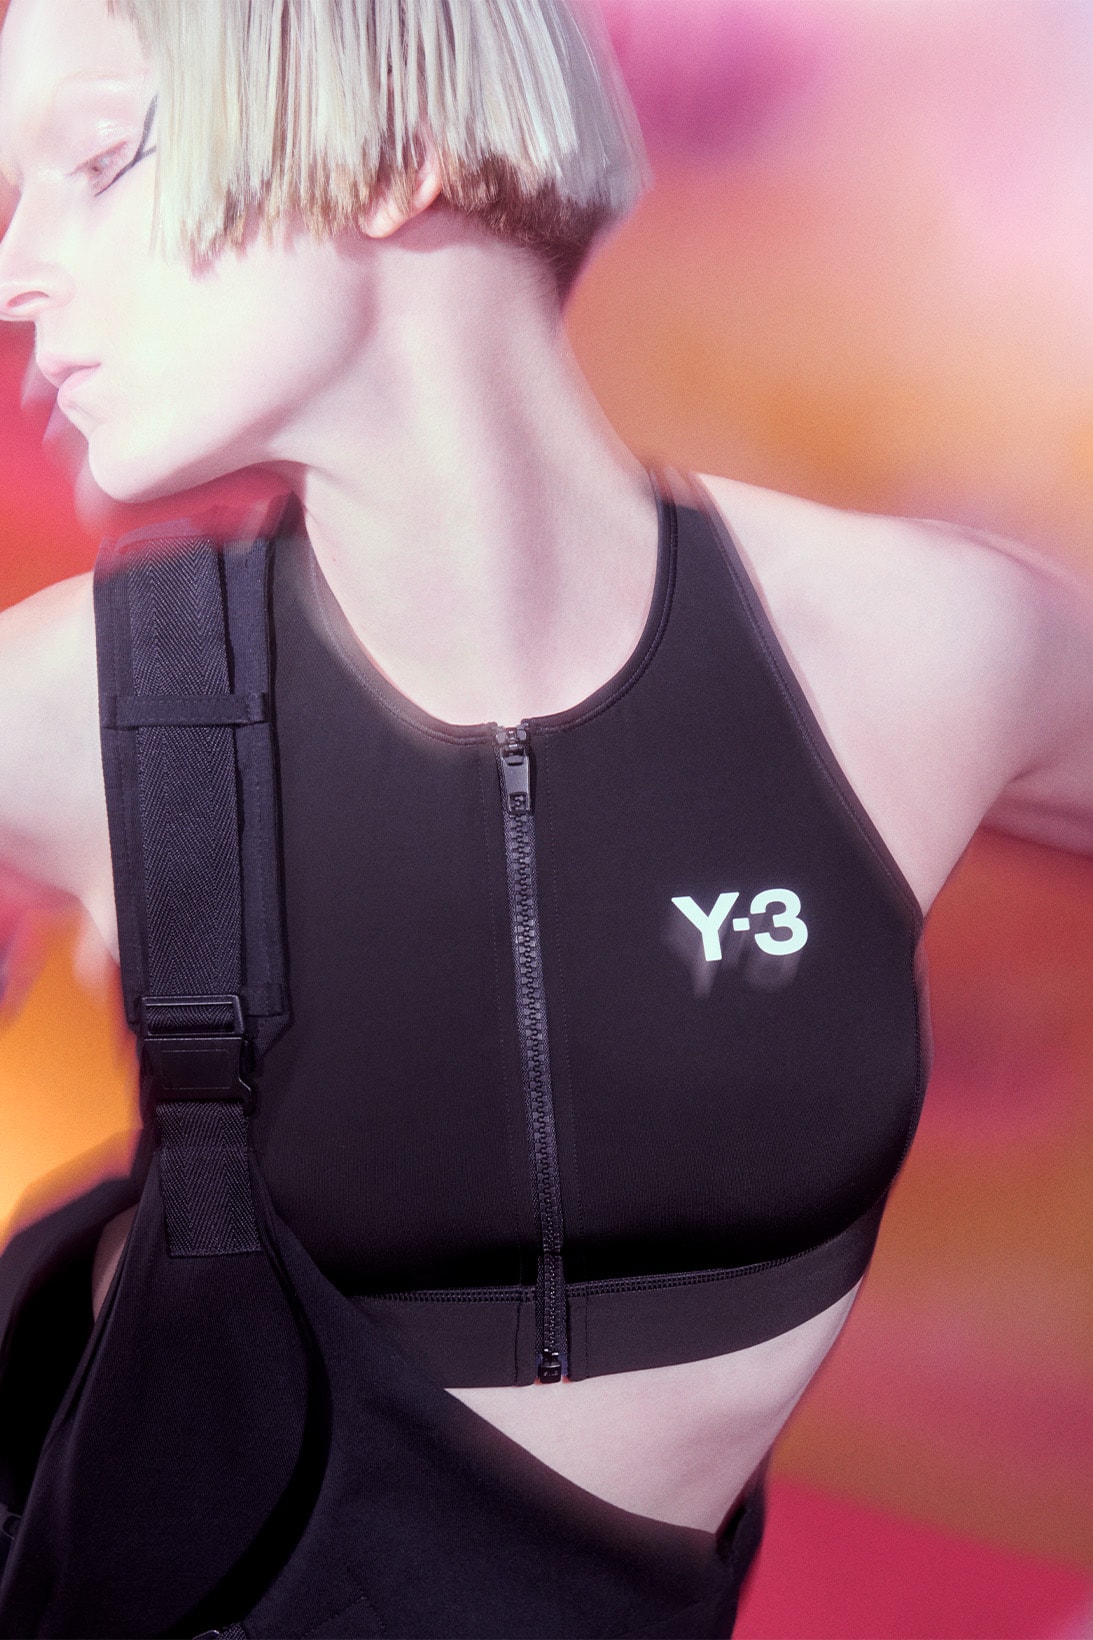 y-3 spring summer collection chapter 2 sneakers accessories release info bra top